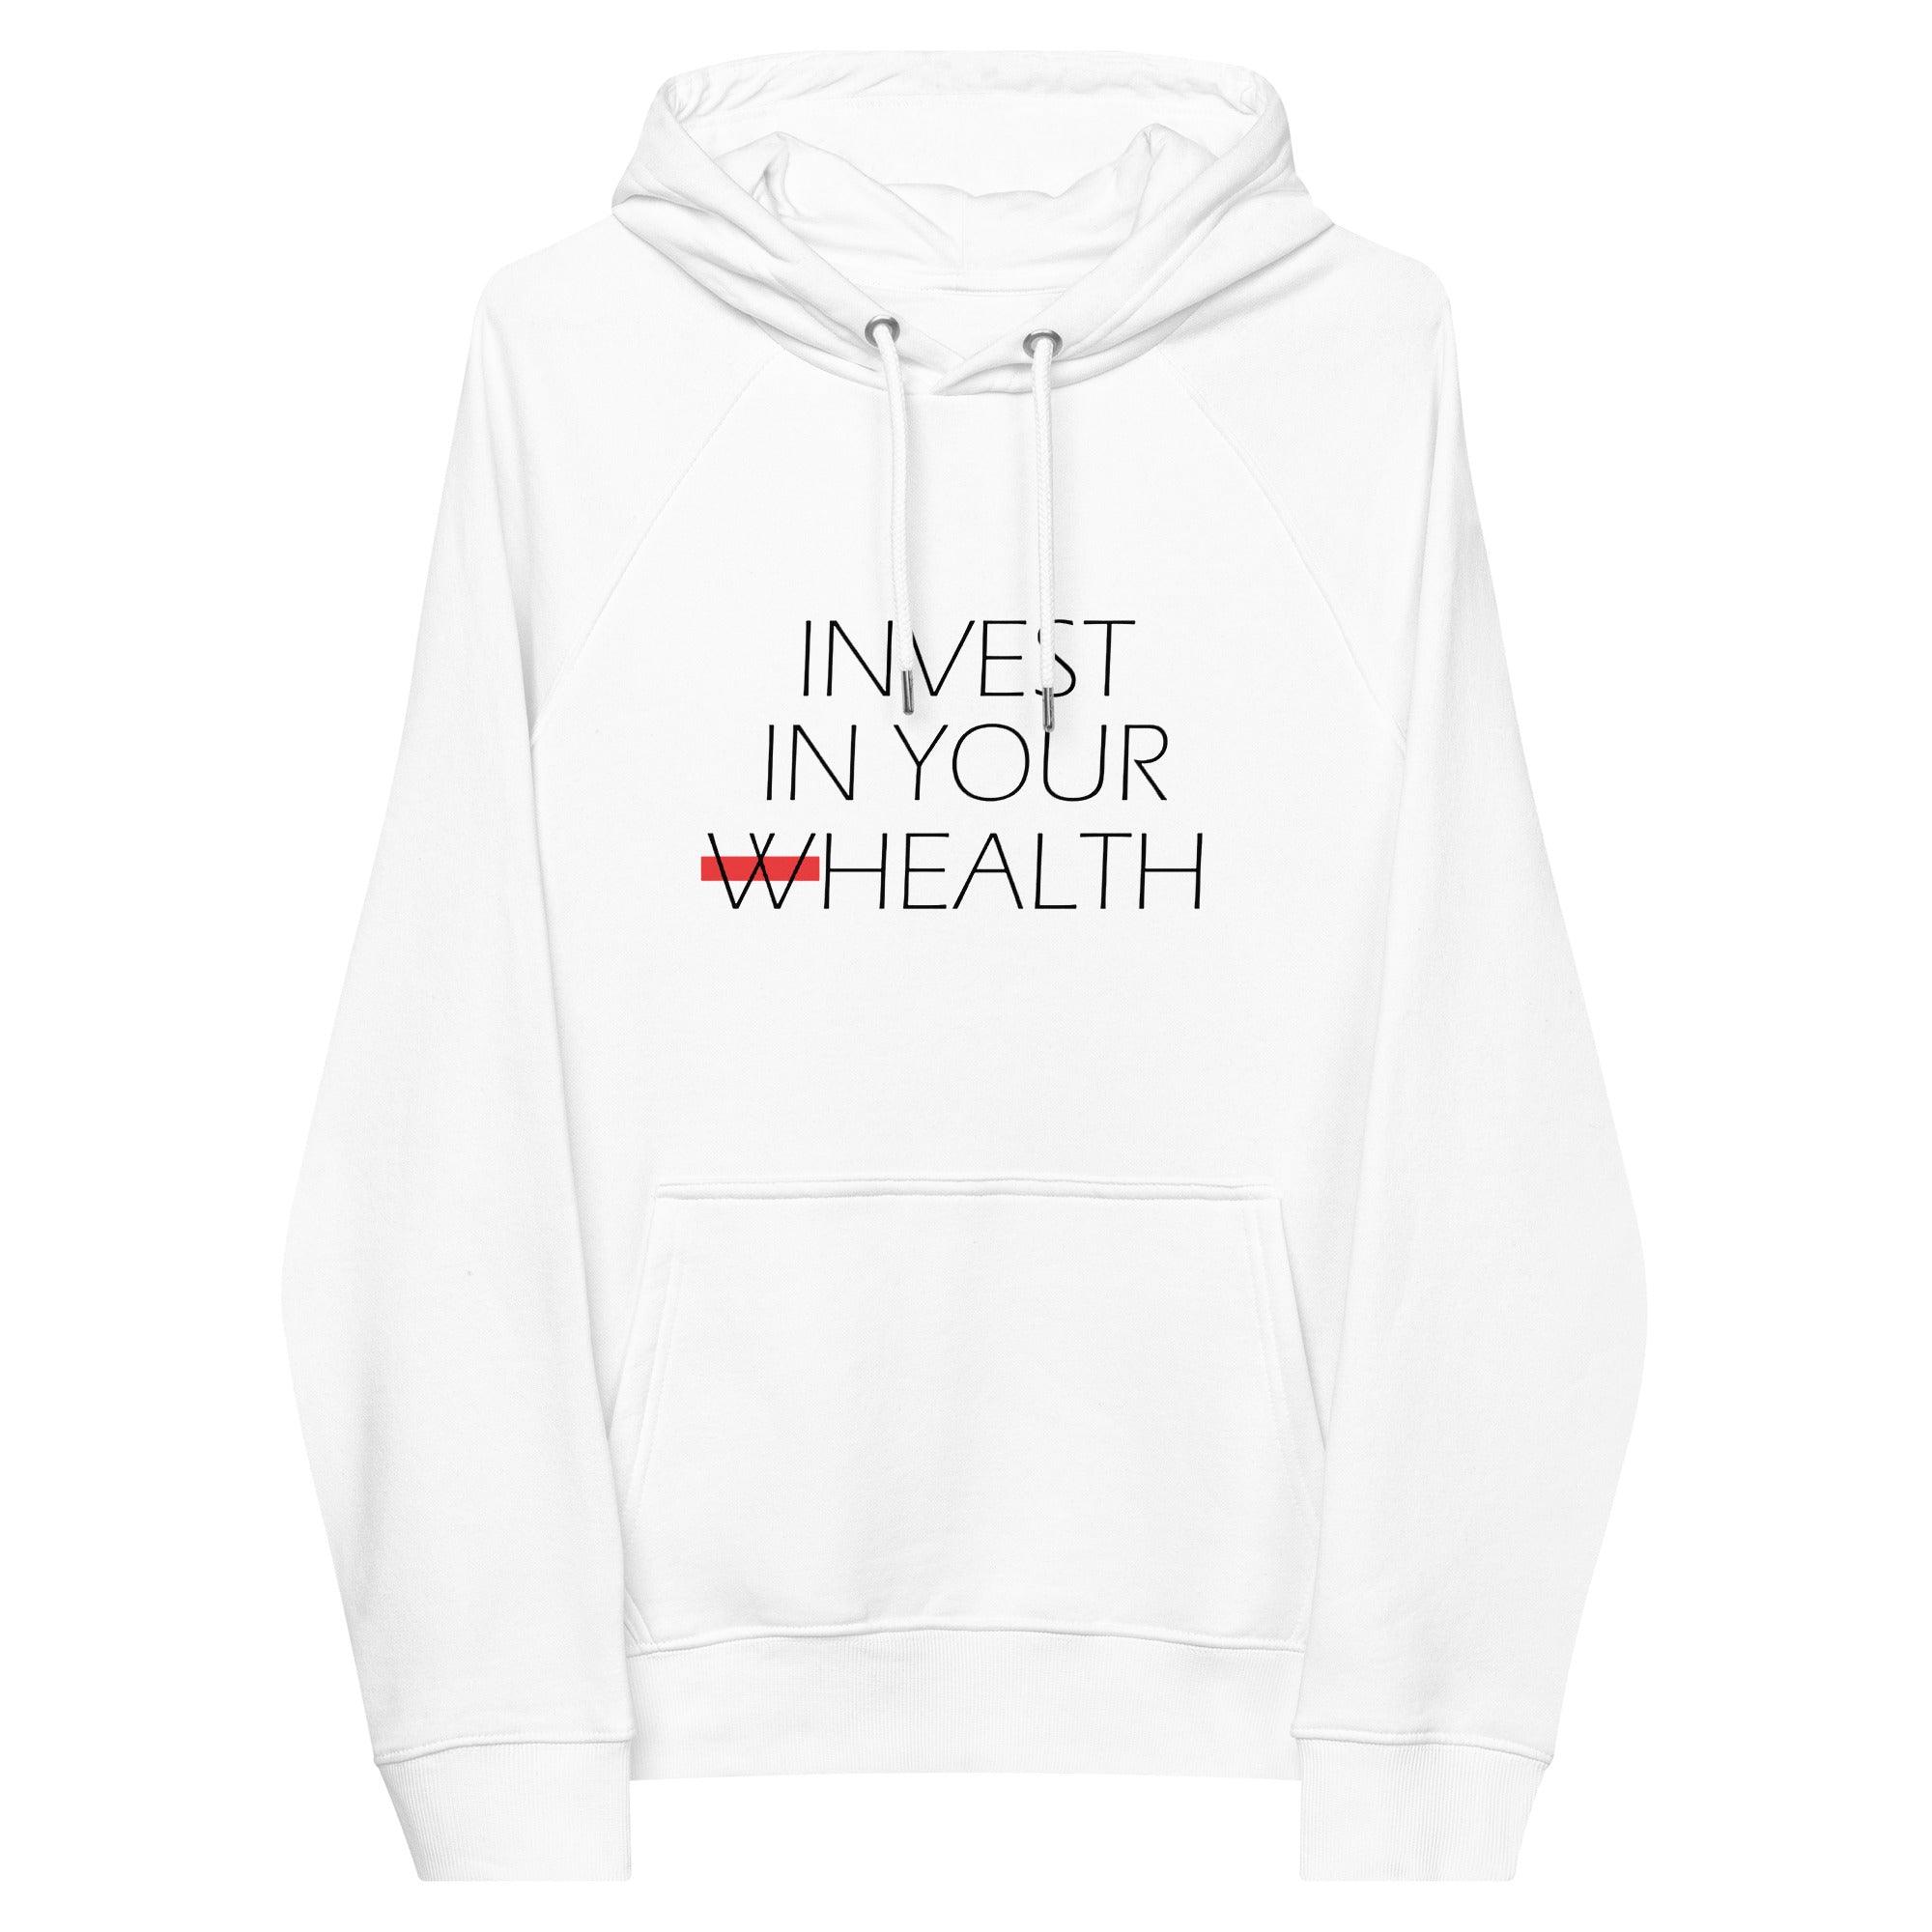 Invest In Your WHealth Pullover Hoodie - InvestmenTees